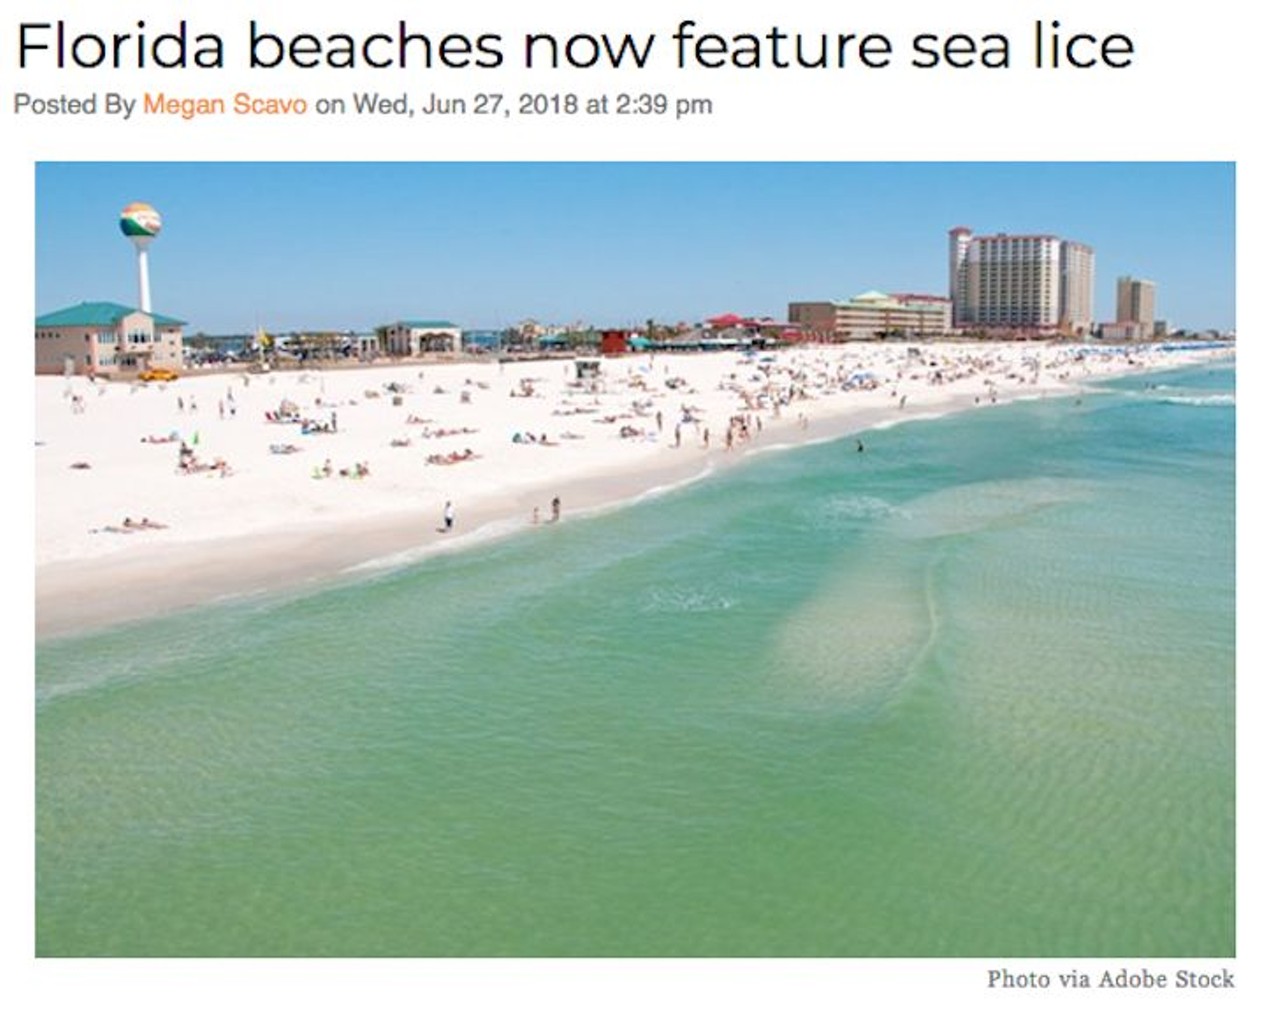 Apparently, people can get lice from swimming in the ocean now. And that's exactly what happened at some Northwest Florida beaches. Read more here.